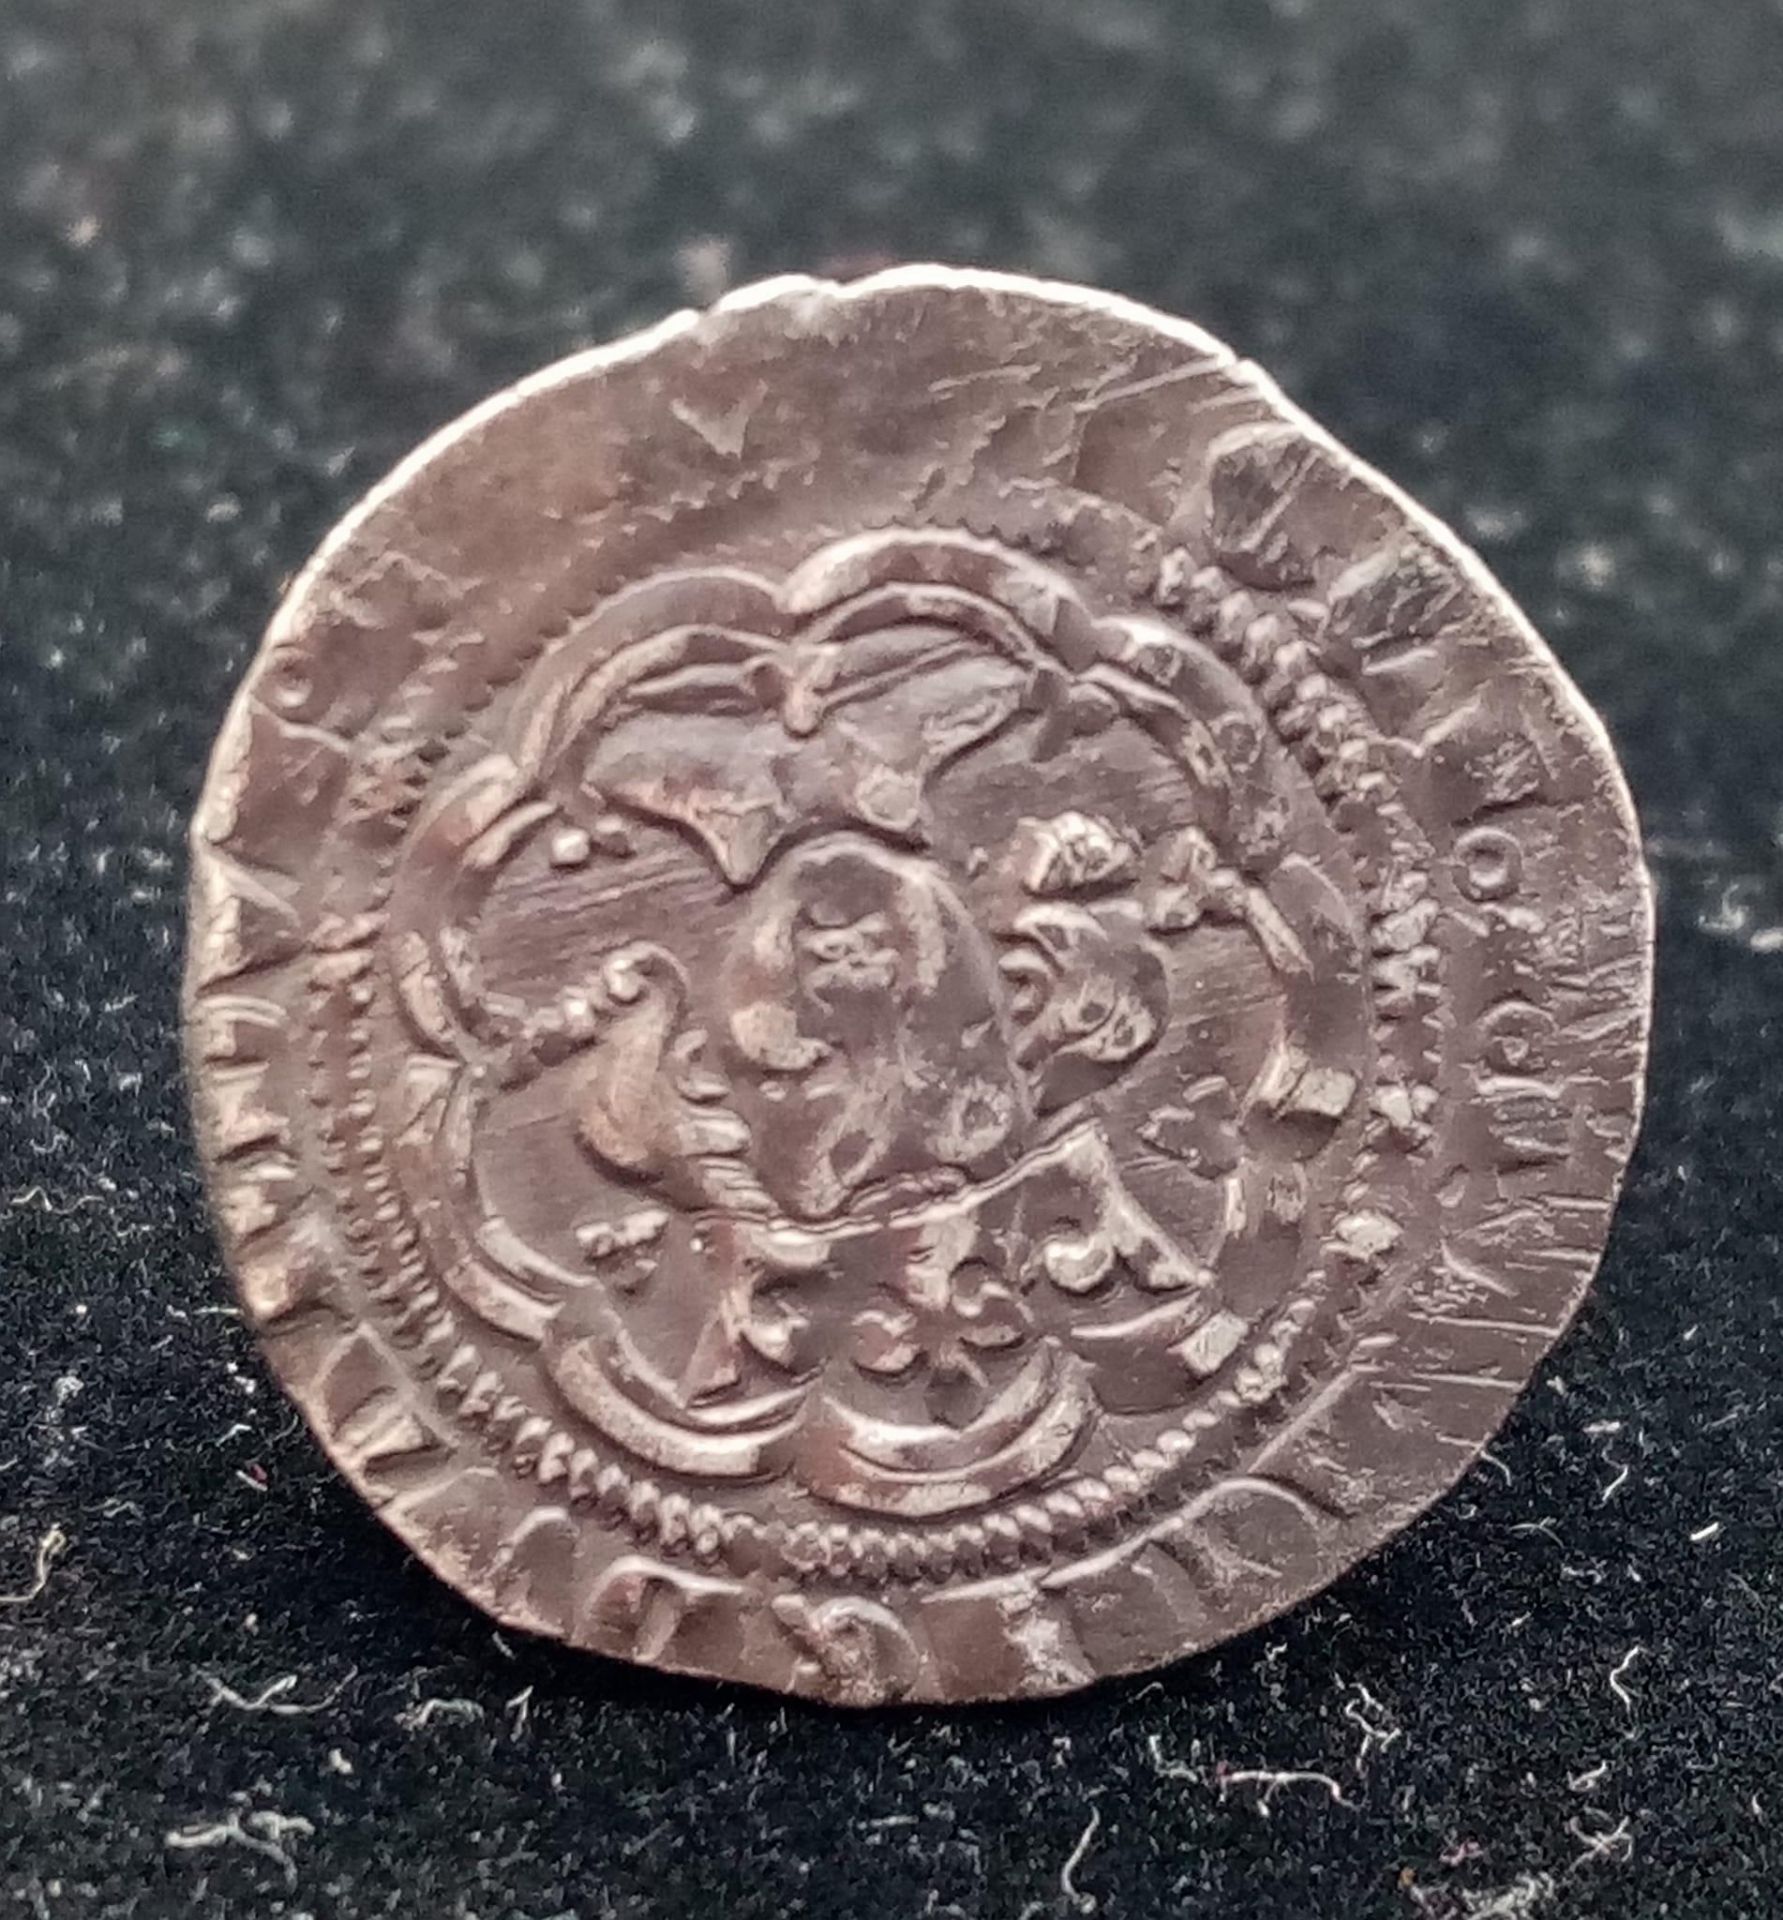 A Edward III, Pre-Treaty, Half Groat Coin. Series D. See photos for condition. S1575